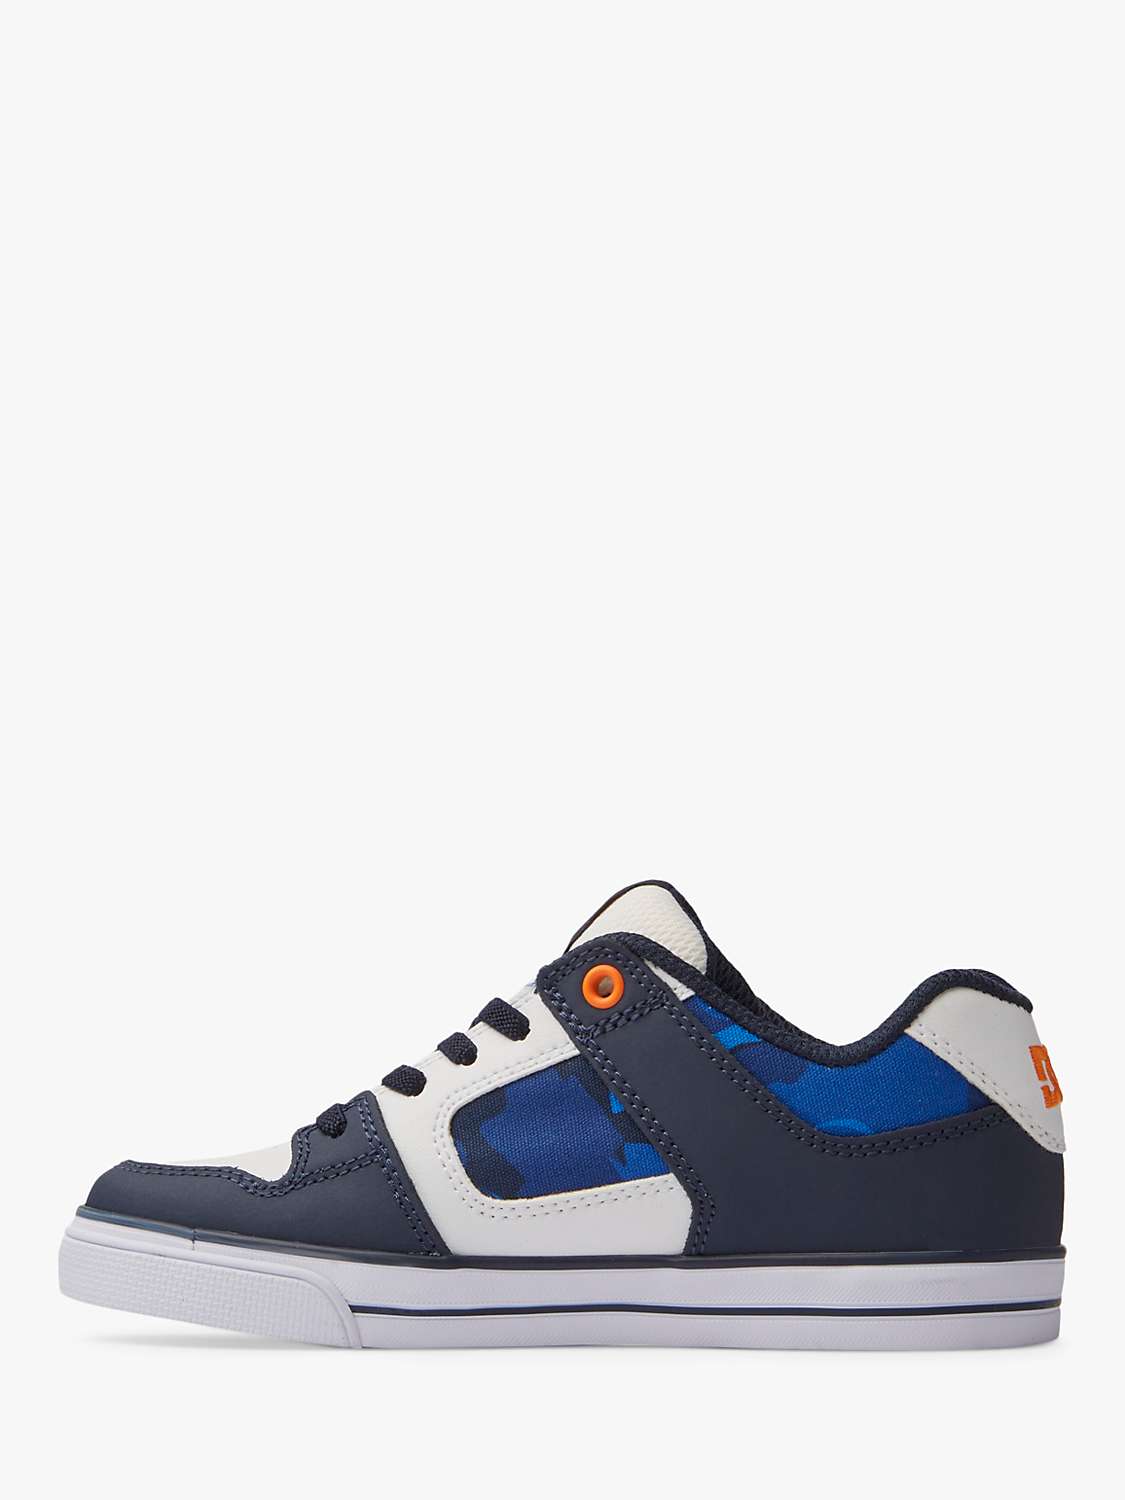 Buy DC Shoes Kids' Pure Leather Camo Lace Up Trainers, Blue/Multi Online at johnlewis.com